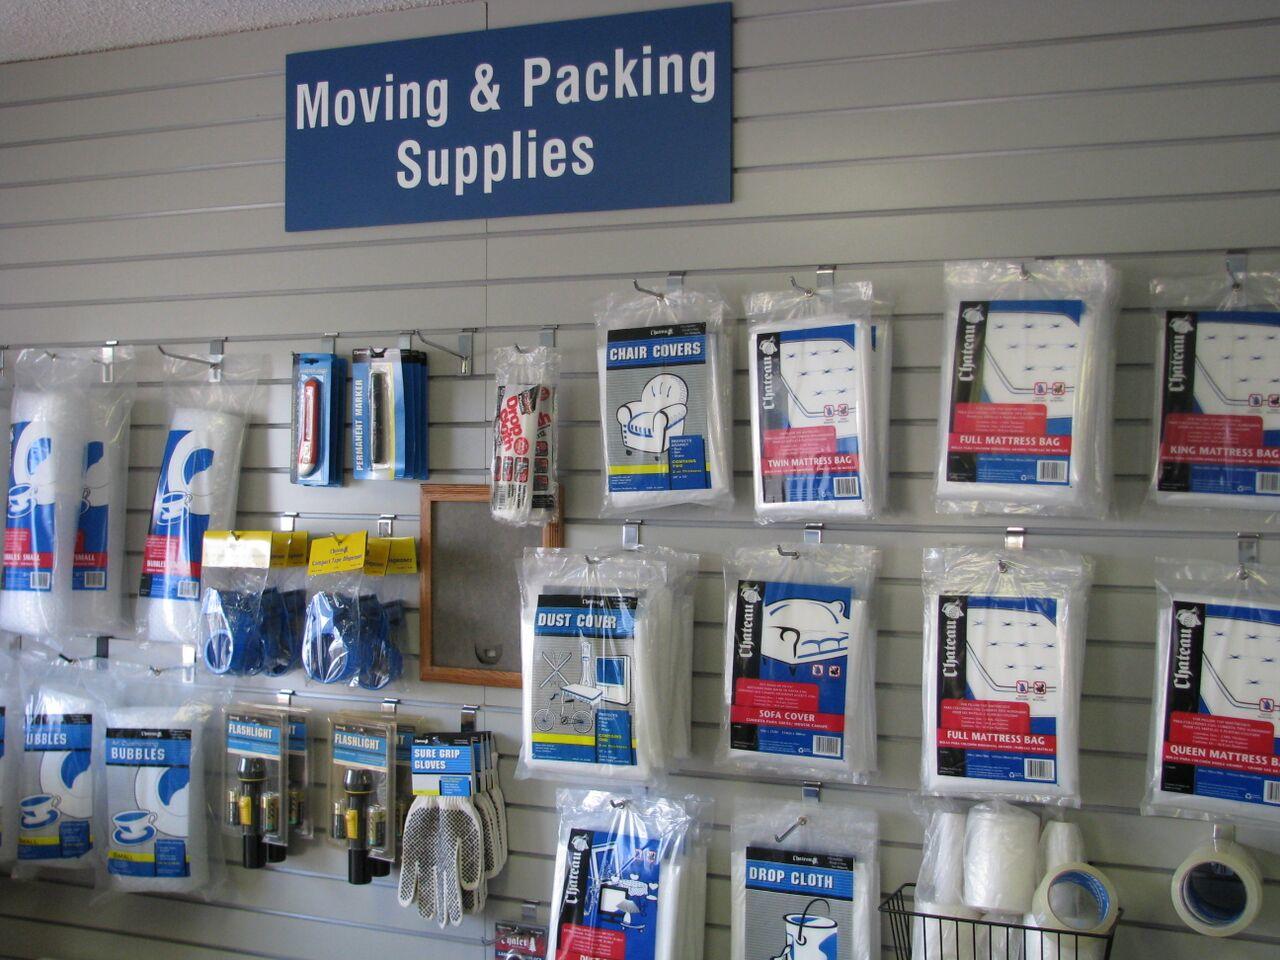 Packing and Moving Supplies Available Santa Fe Self Storage Gainesville (352)373-0004